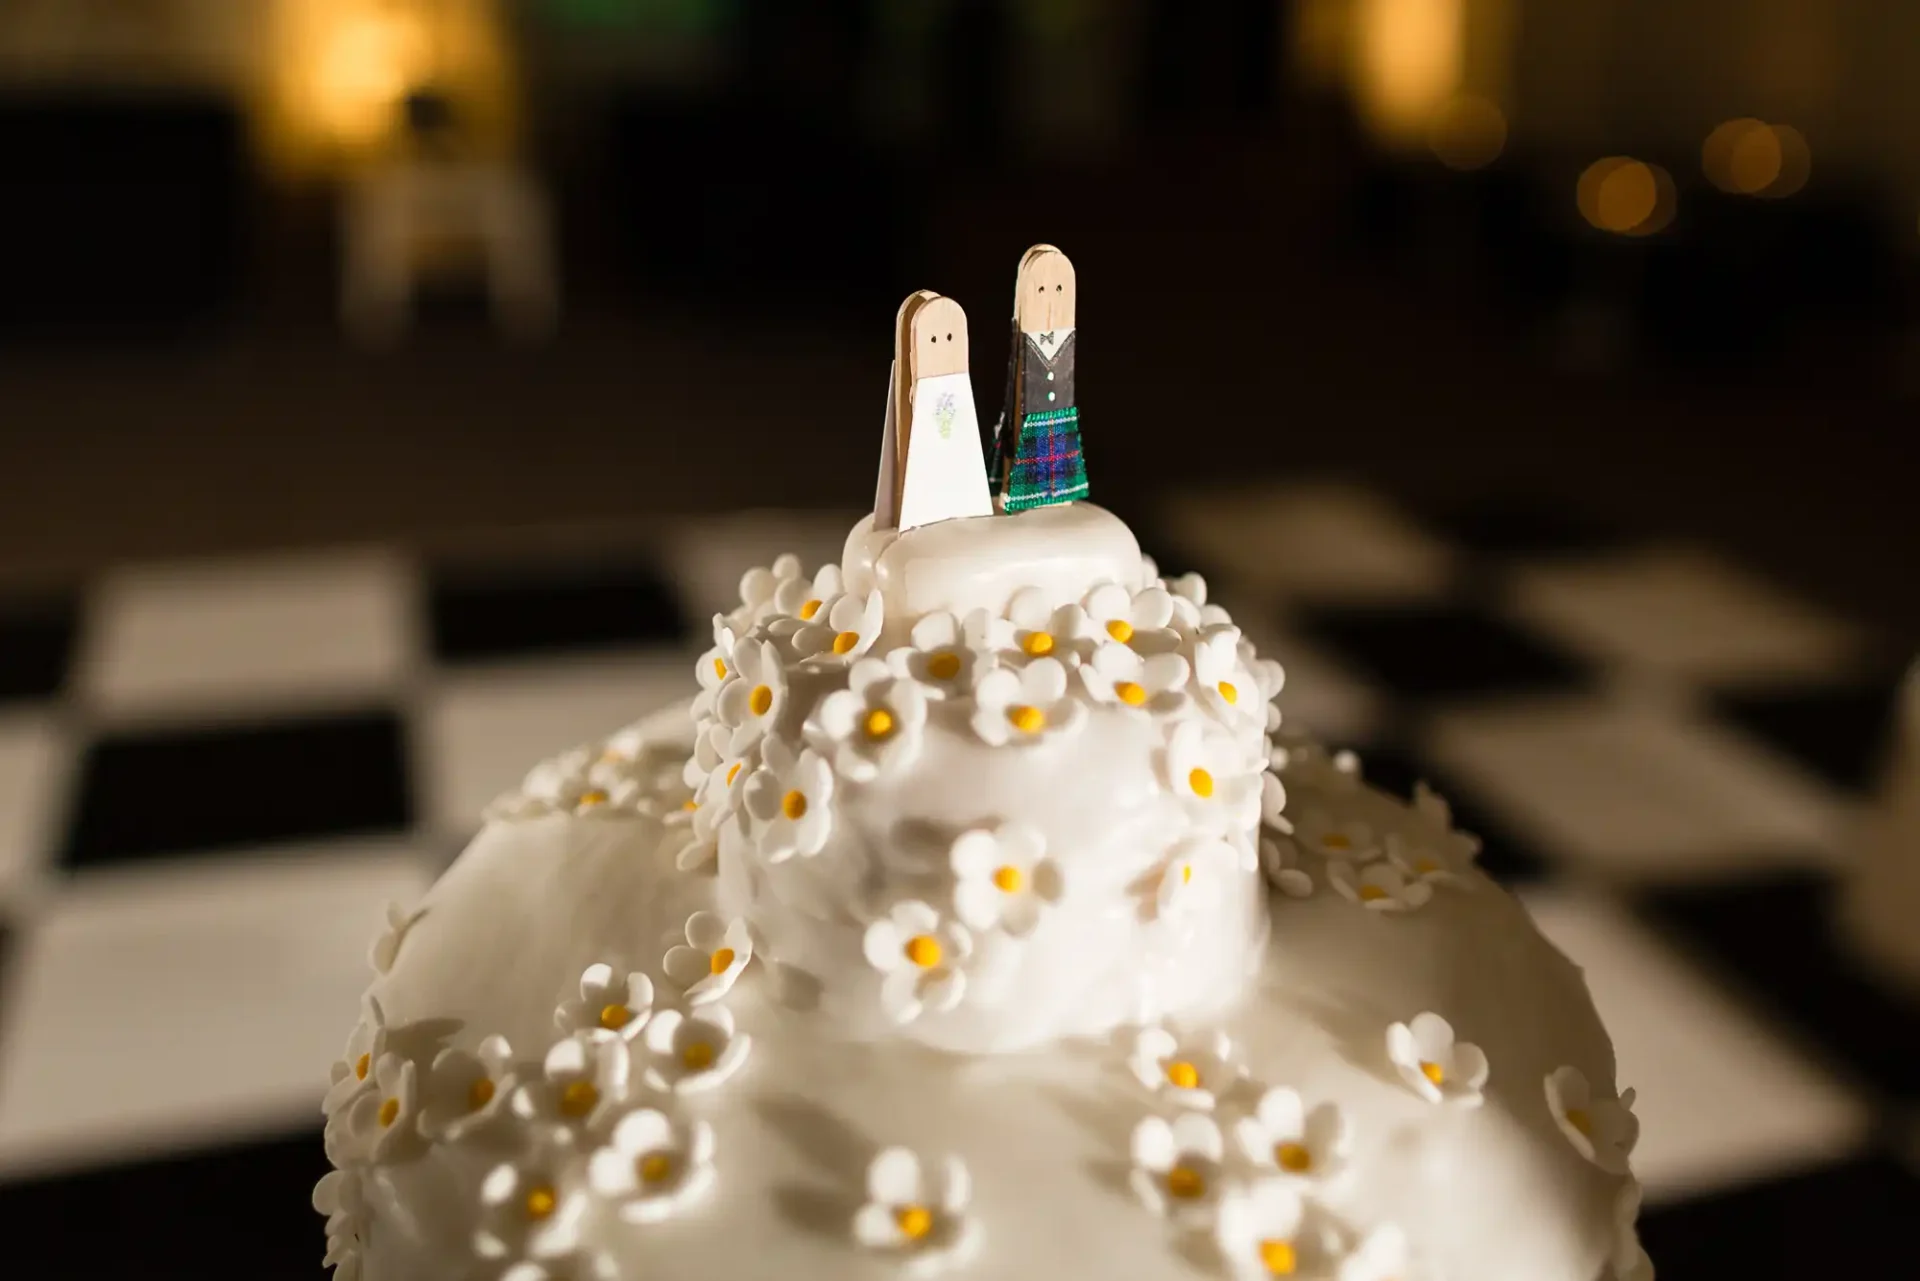 Two wooden figurine toppers on a wedding cake decorated with white flowers, set against a softly blurred background.